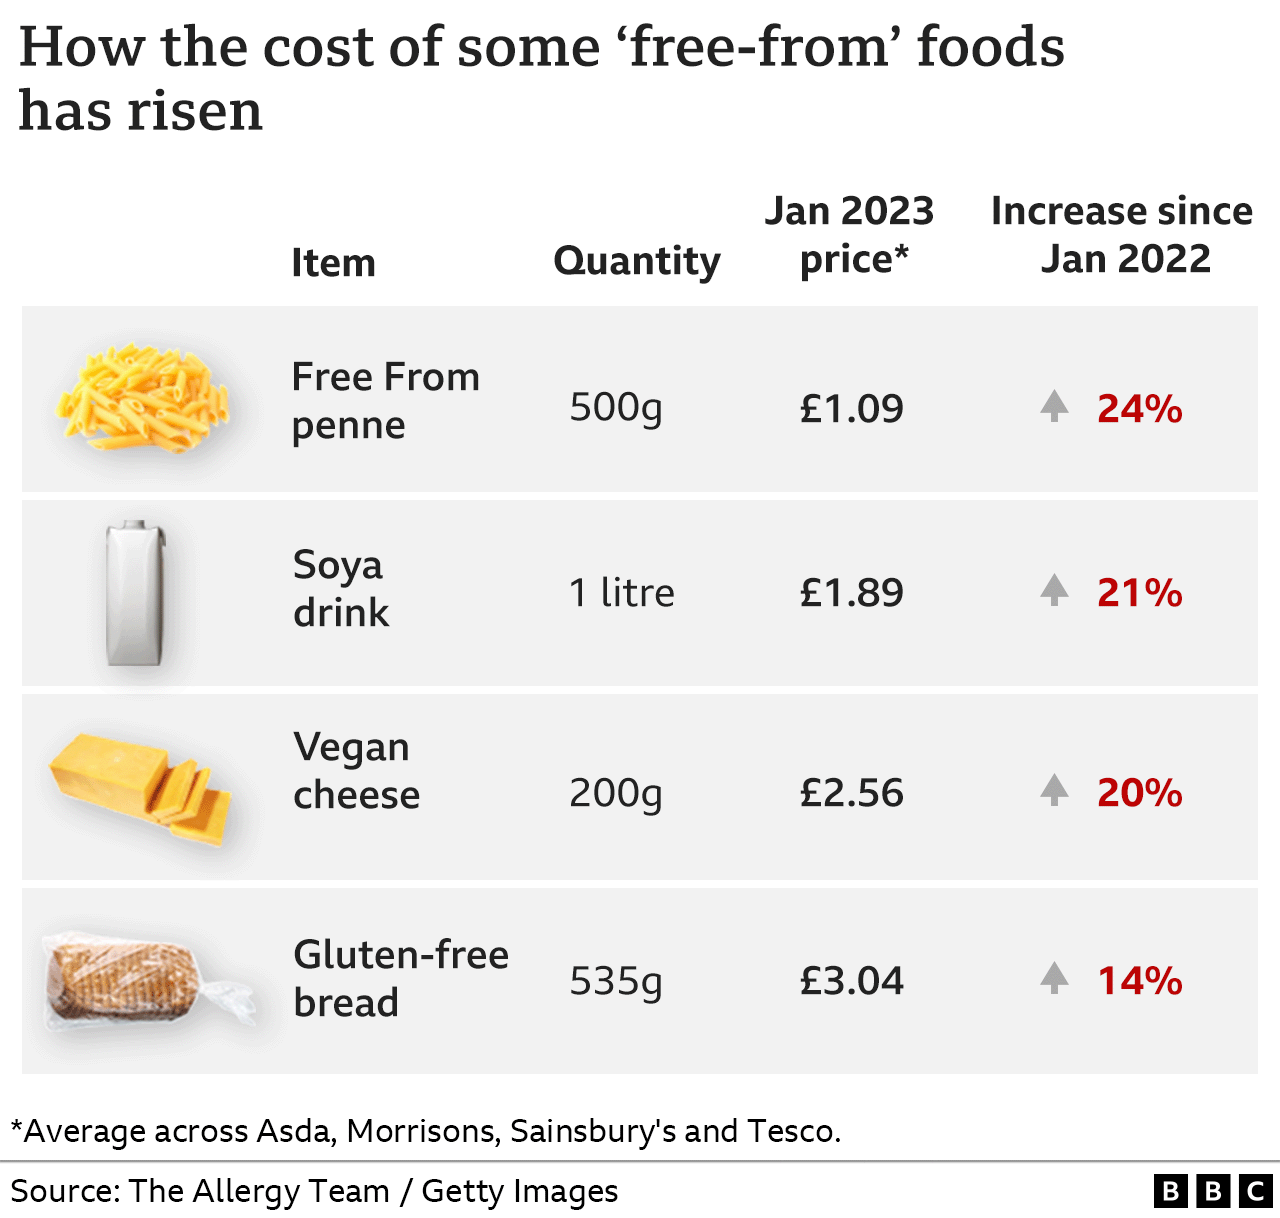 Table showing how much the cost of certain 'free-from' foods has increased in 12 months since January 2022, with Free From penne up 24%, soya drink up 21%, vegan cheese up 20% and Gluten-free bread up 14%